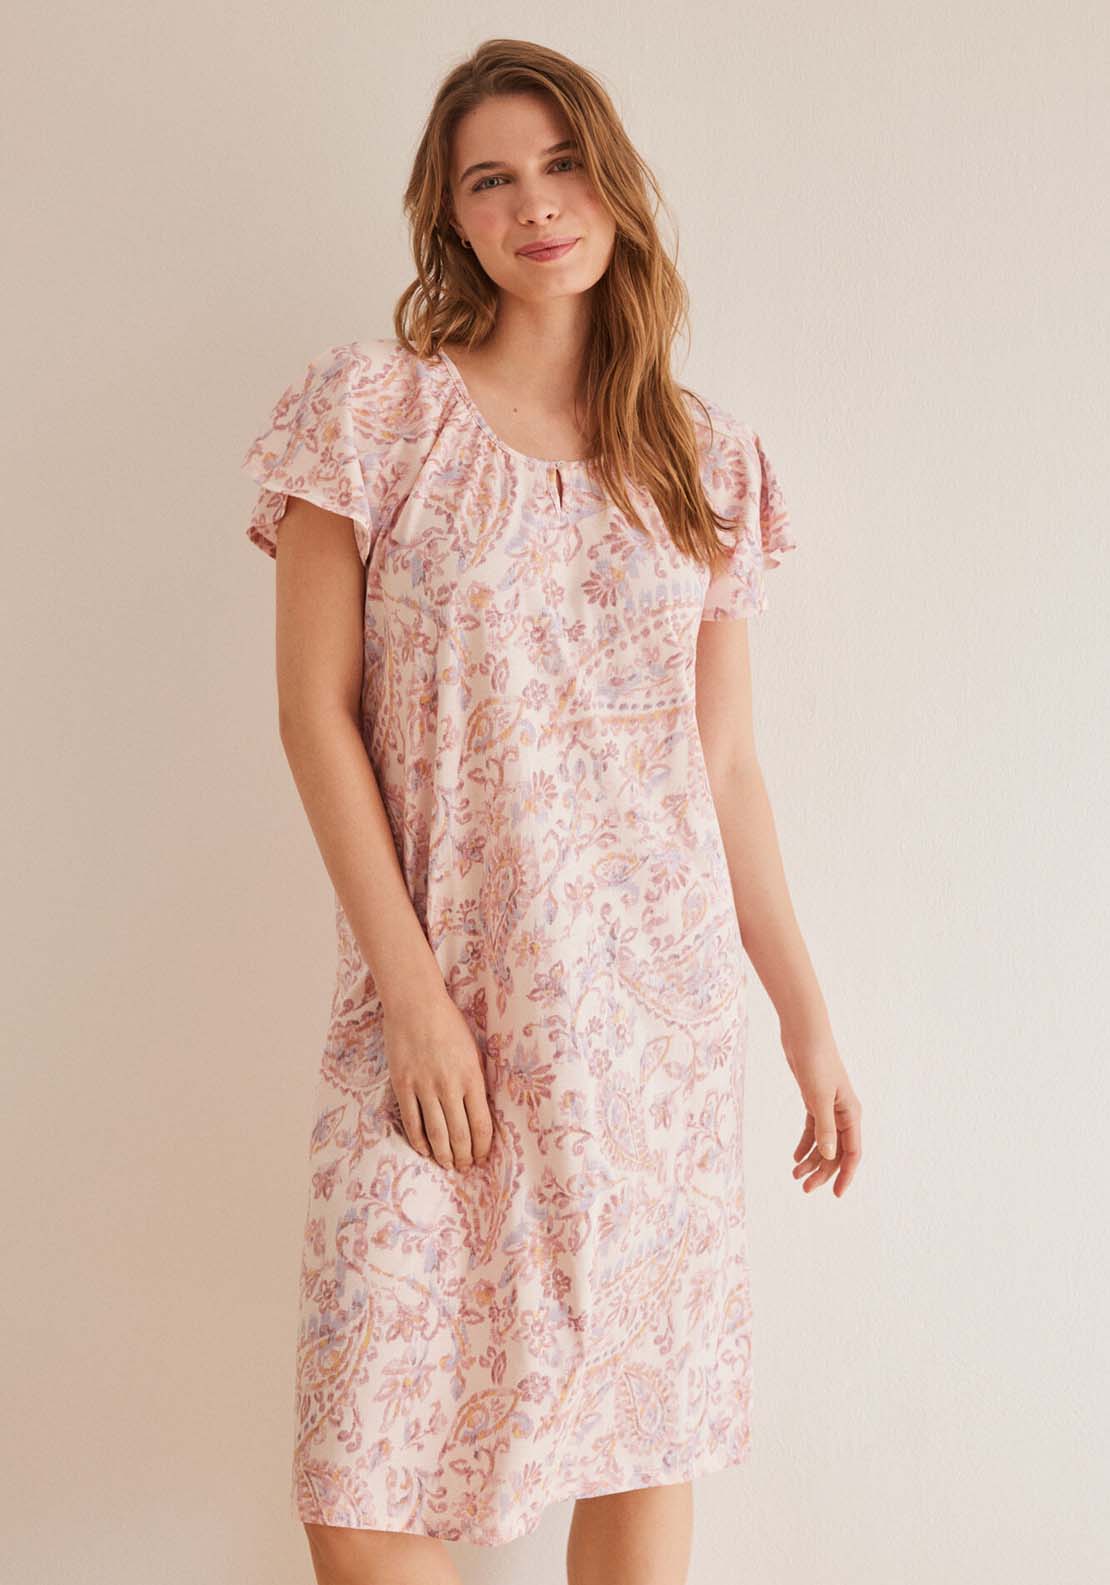 Super Push-up Nightgown